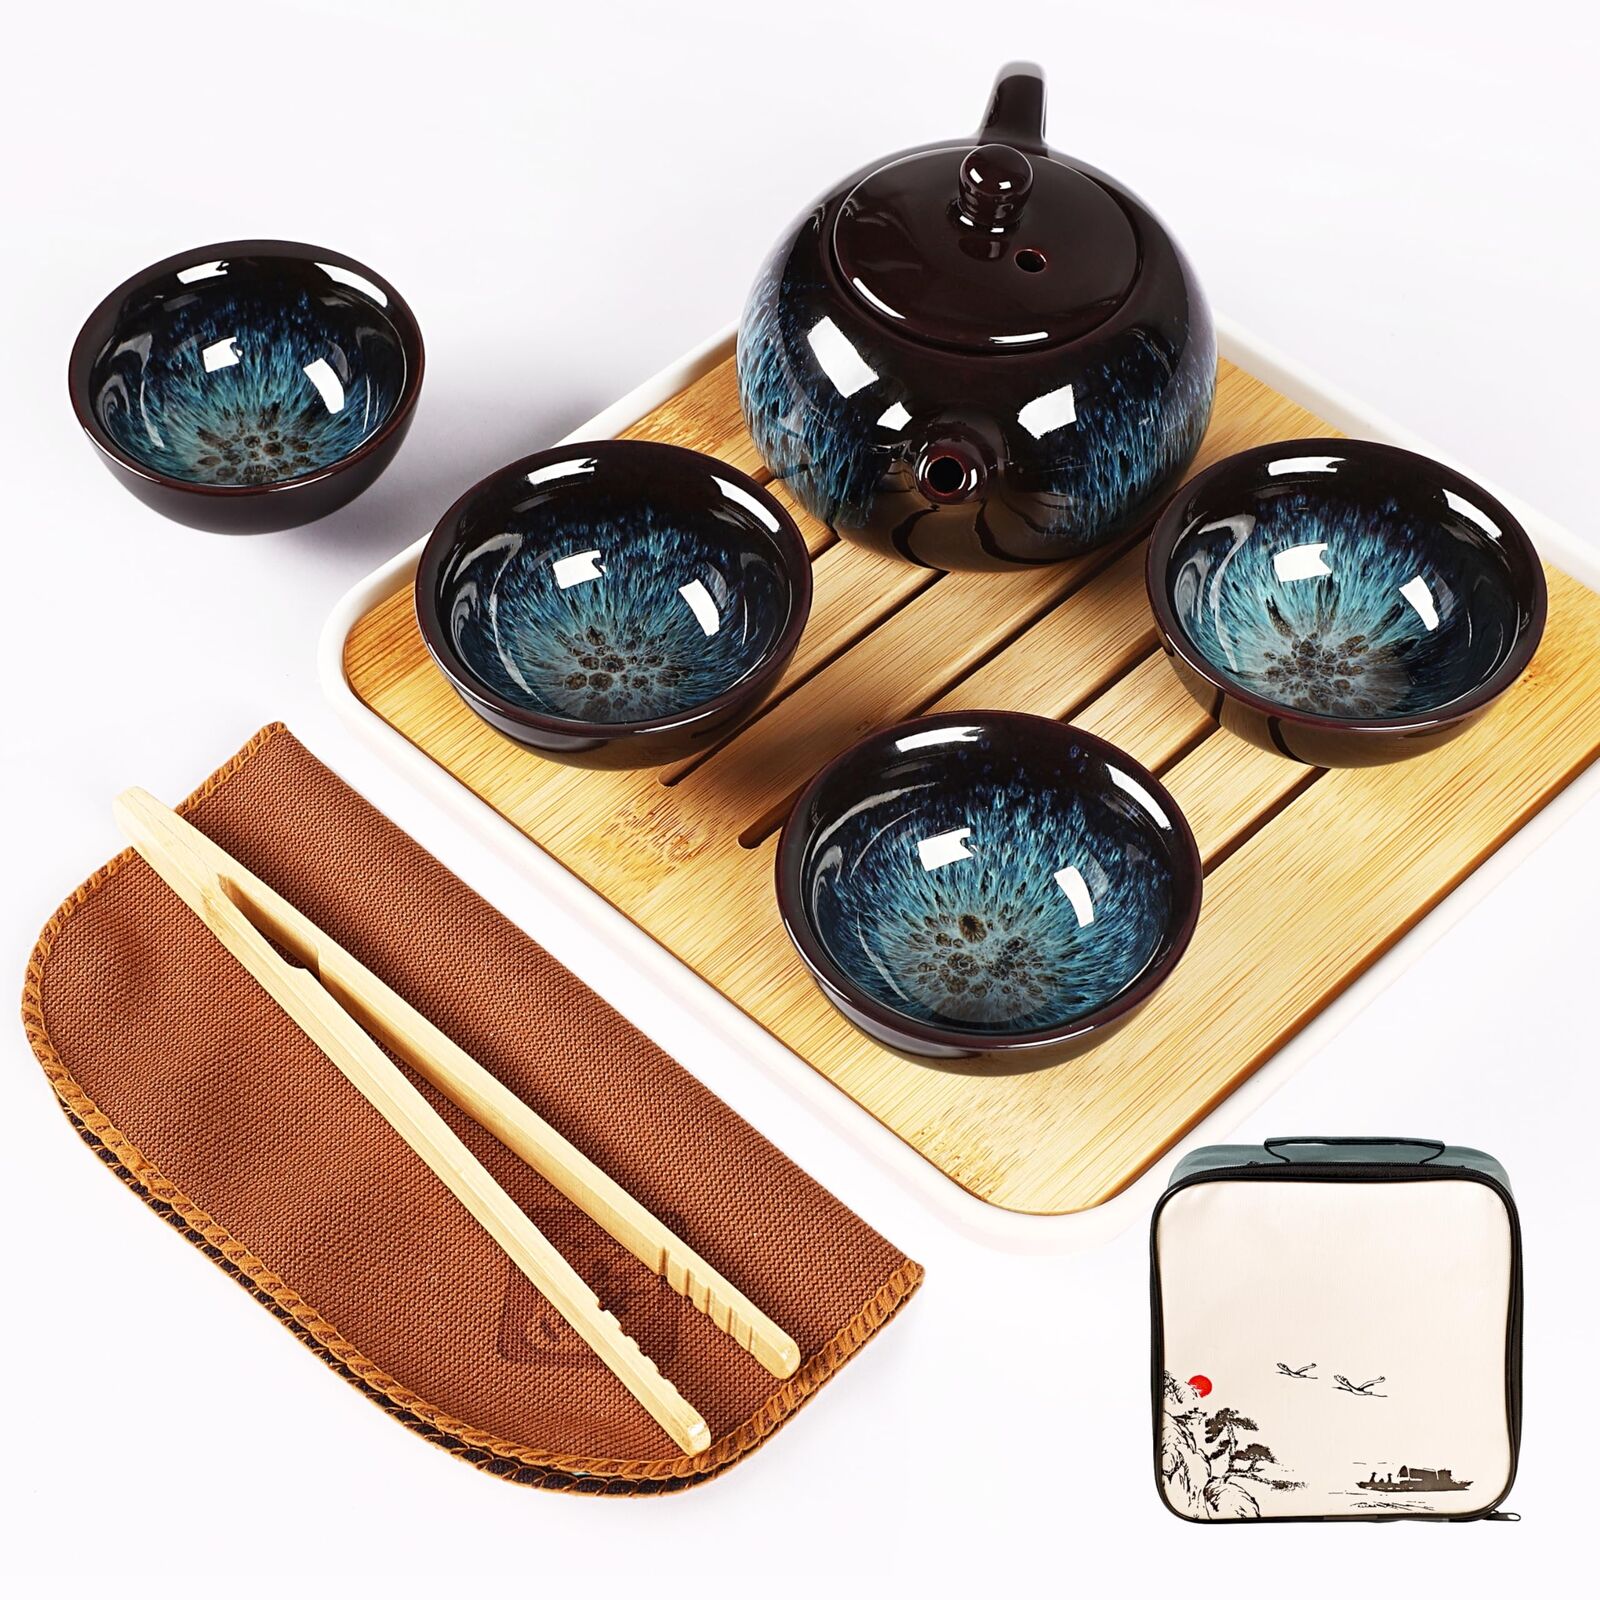 Portable Chinese Gongfu Tea Sets, Procelain Teapot Set with Gift Bag, Exquisi...